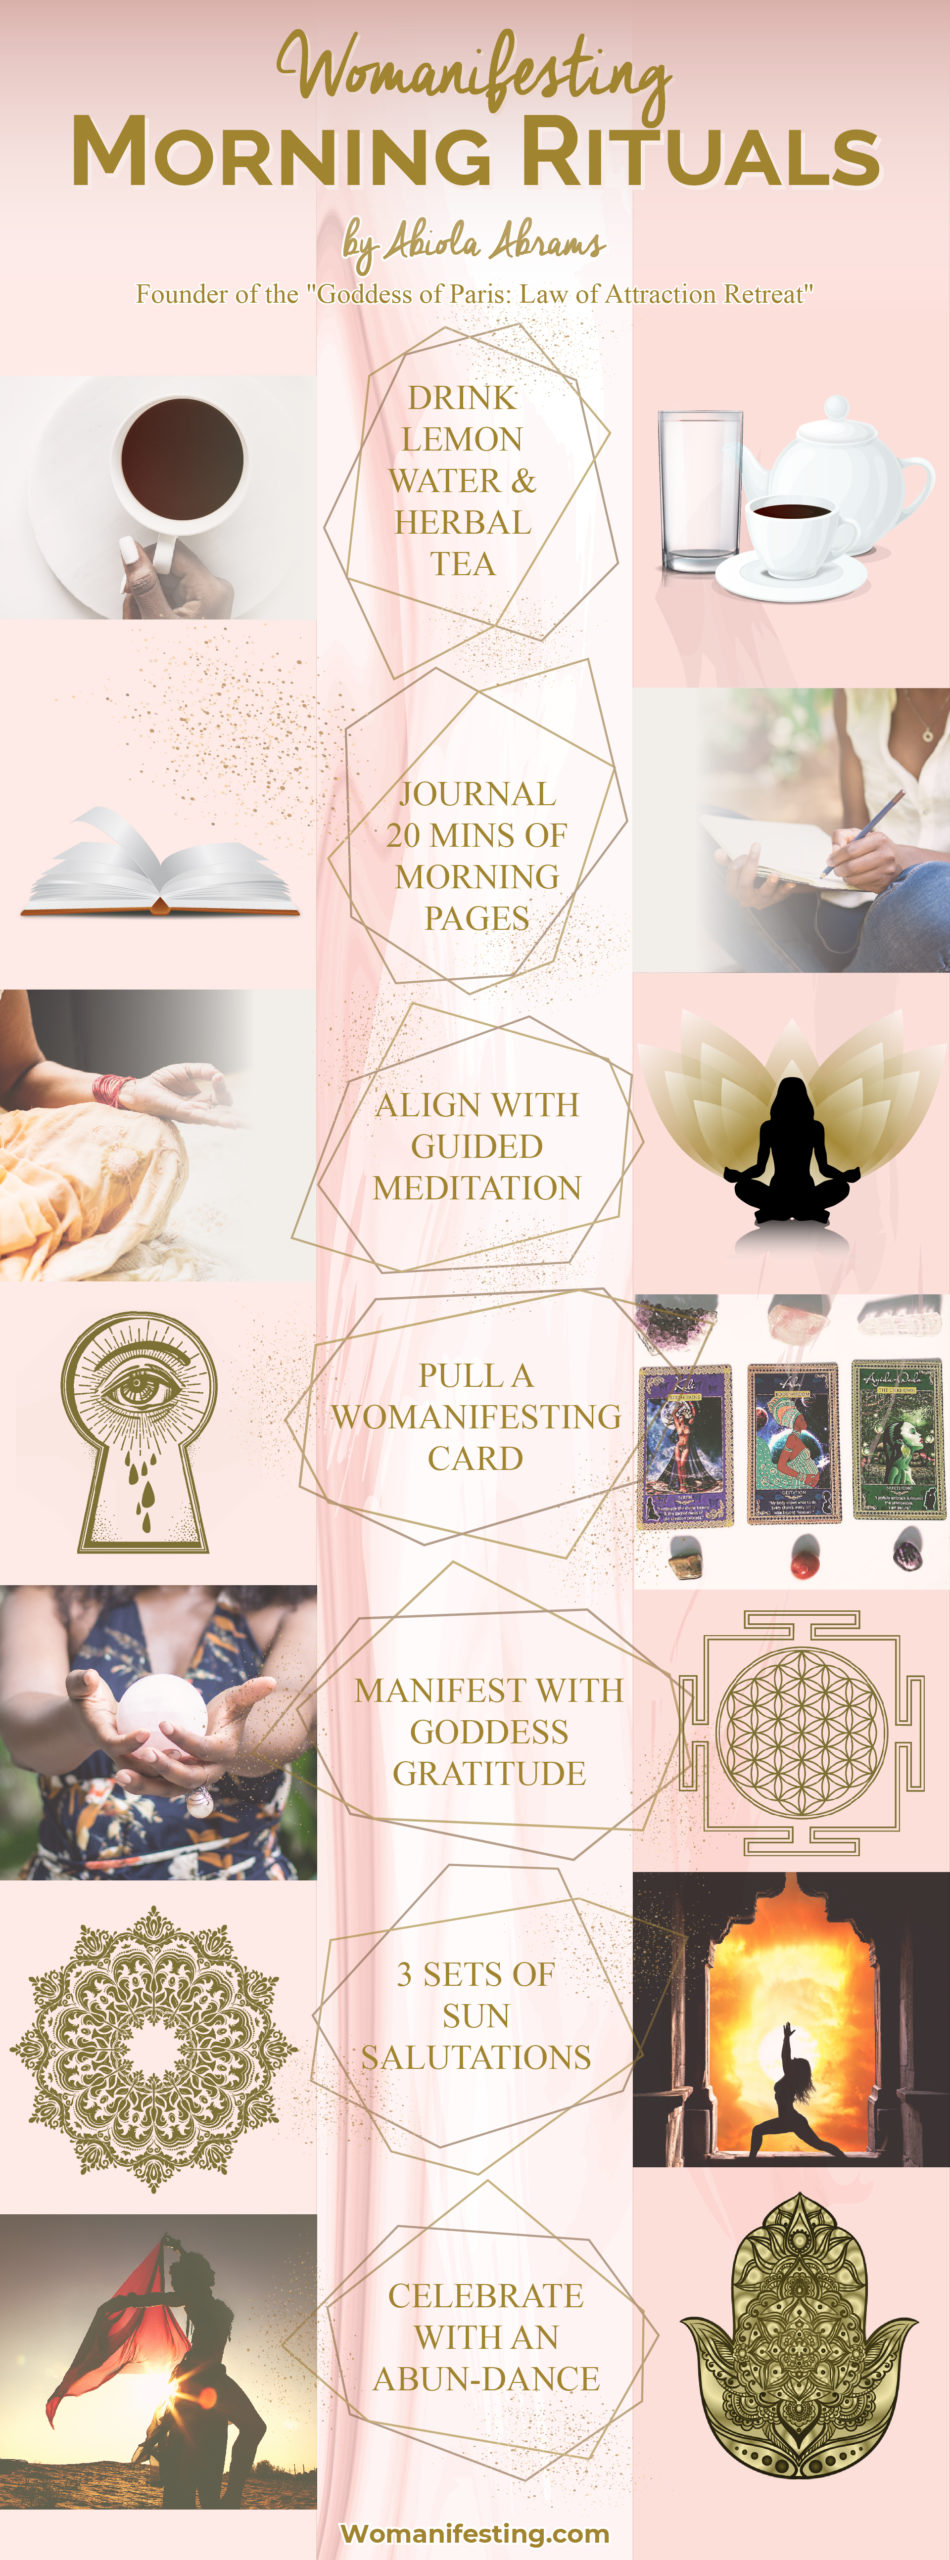 Womanifesting Morning Rituals [Infographic]